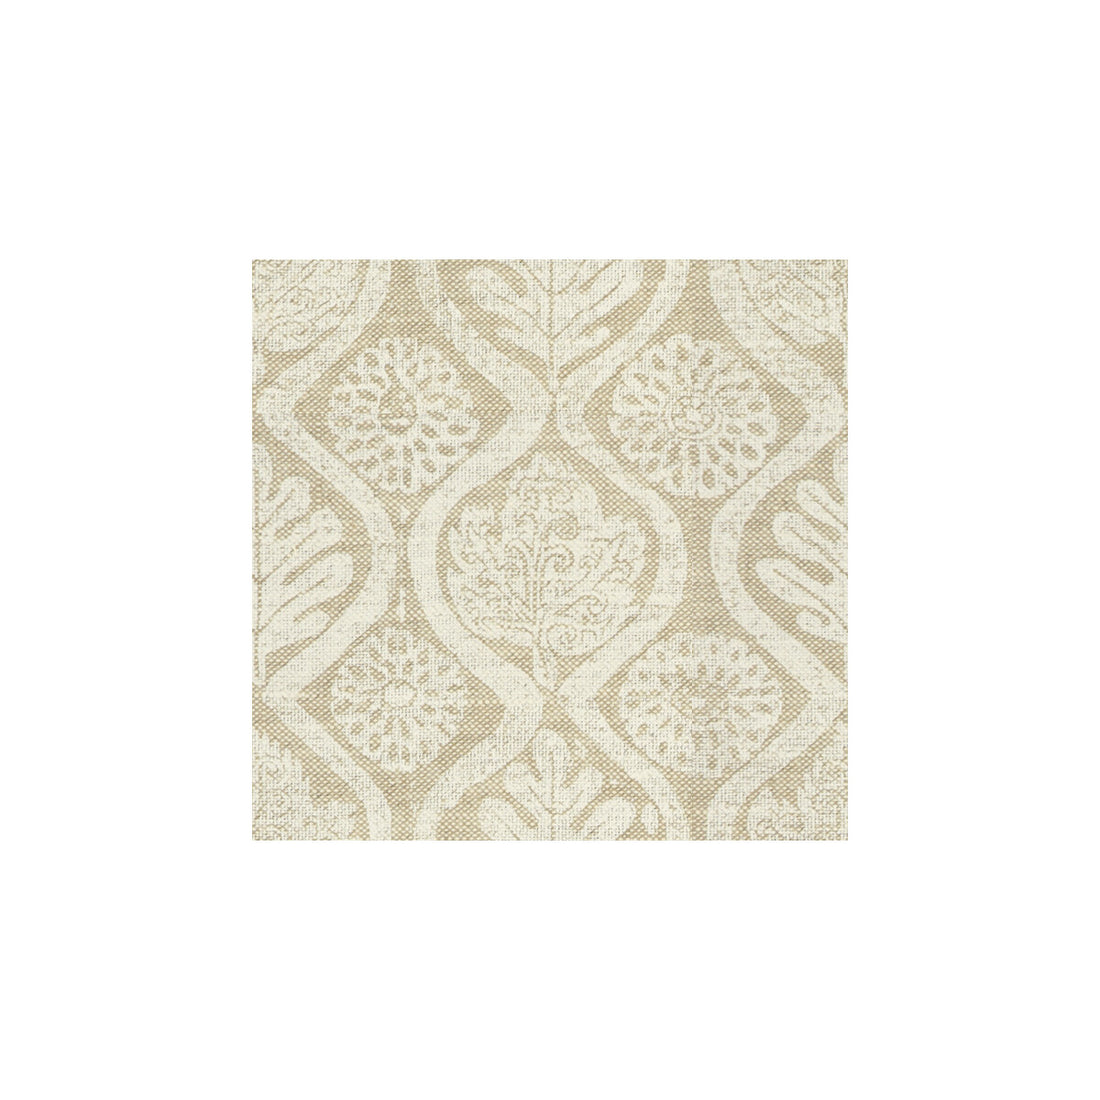 Oakleaves fabric in white/oat color - pattern BFC-3515.1.0 - by Lee Jofa in the Blithfield collection